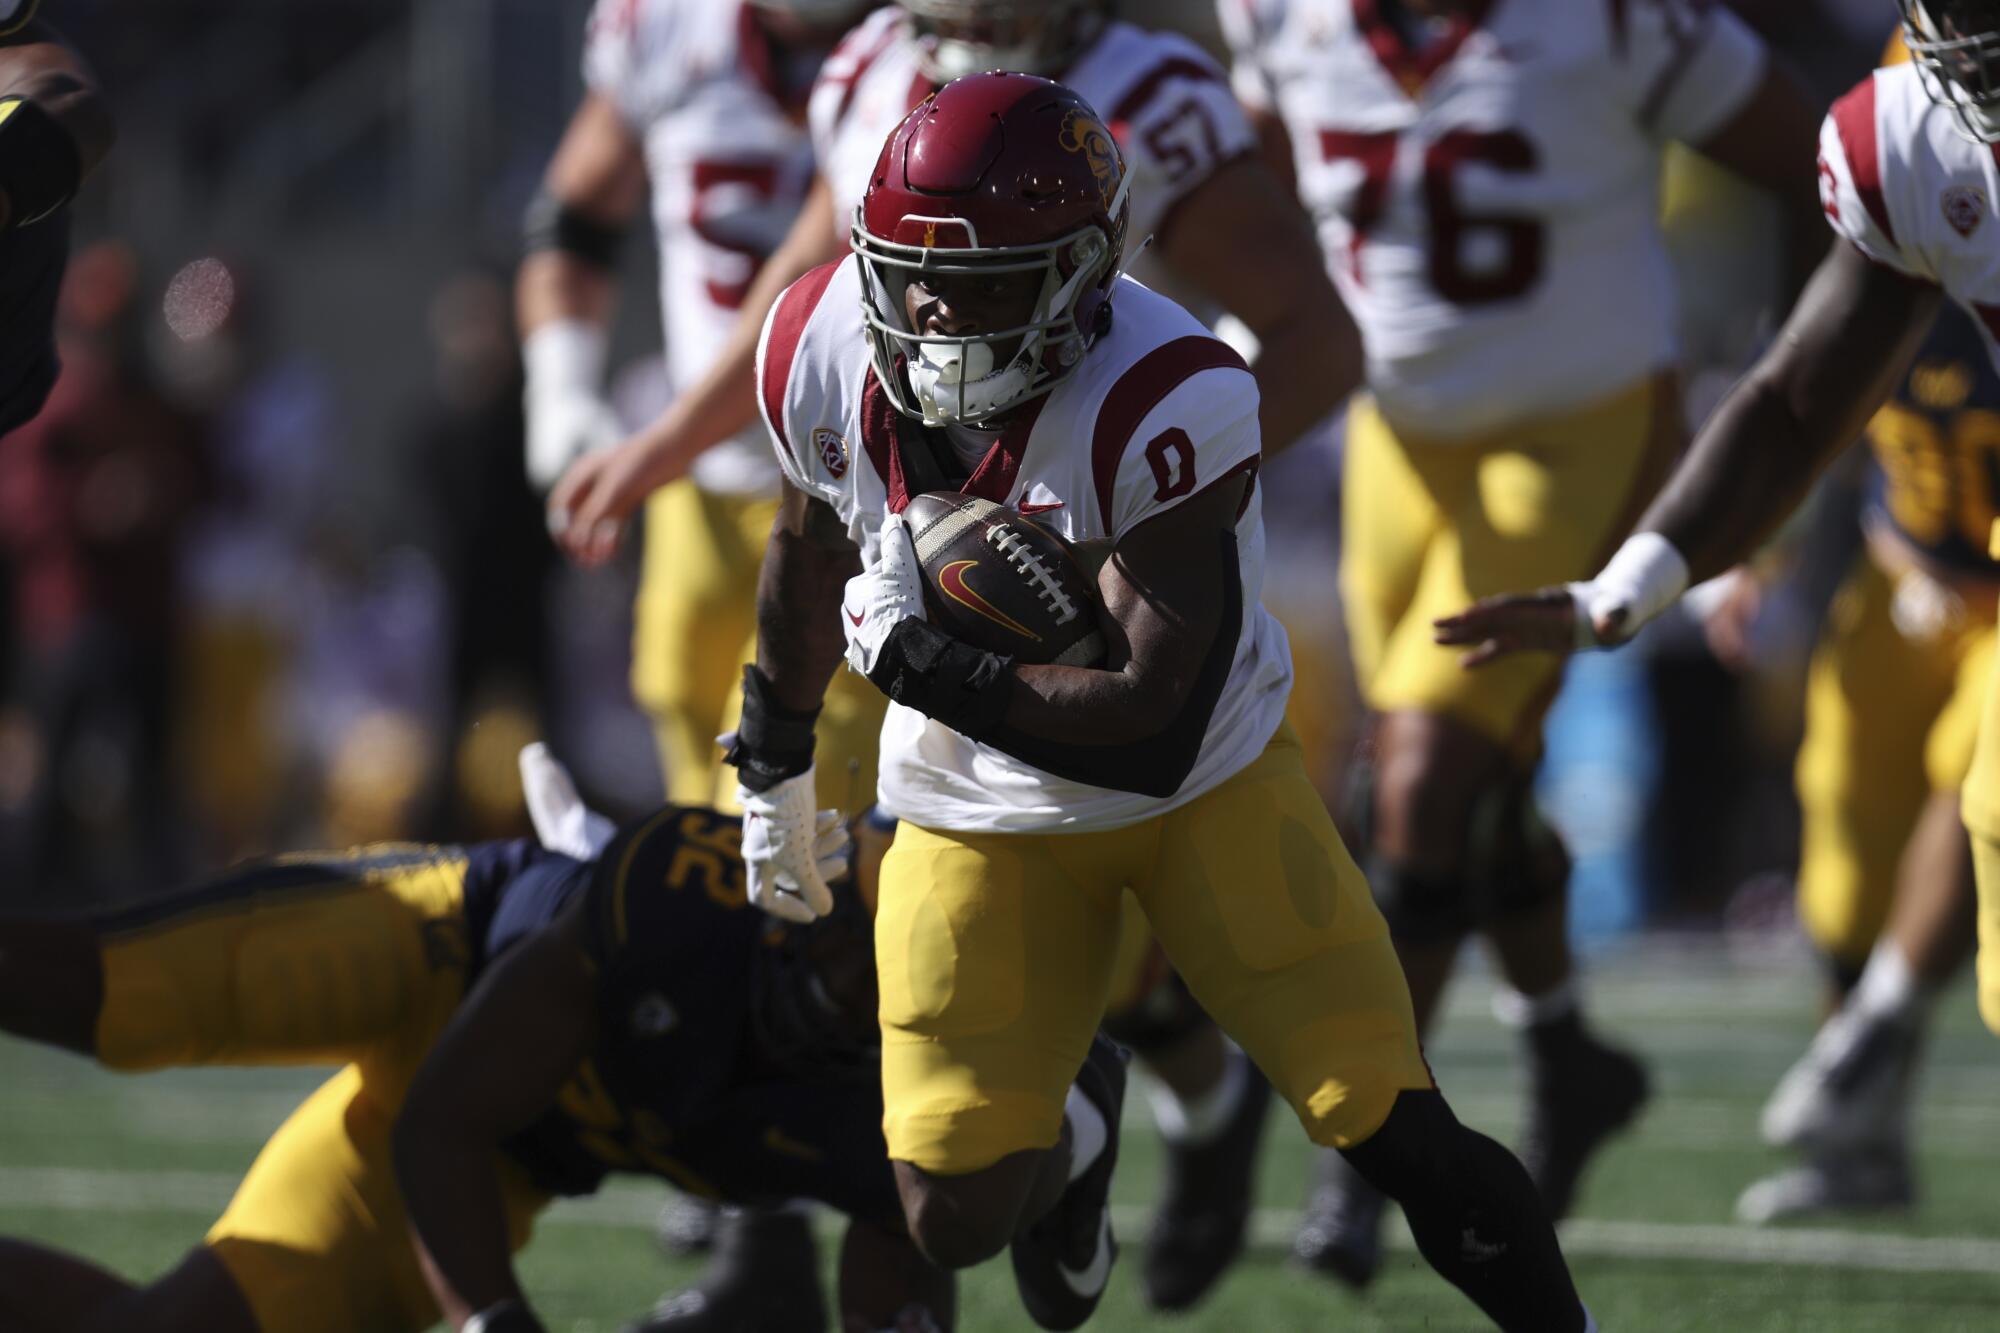 USC running back MarShawn Lloyd carries the ball during the first half against Cal.